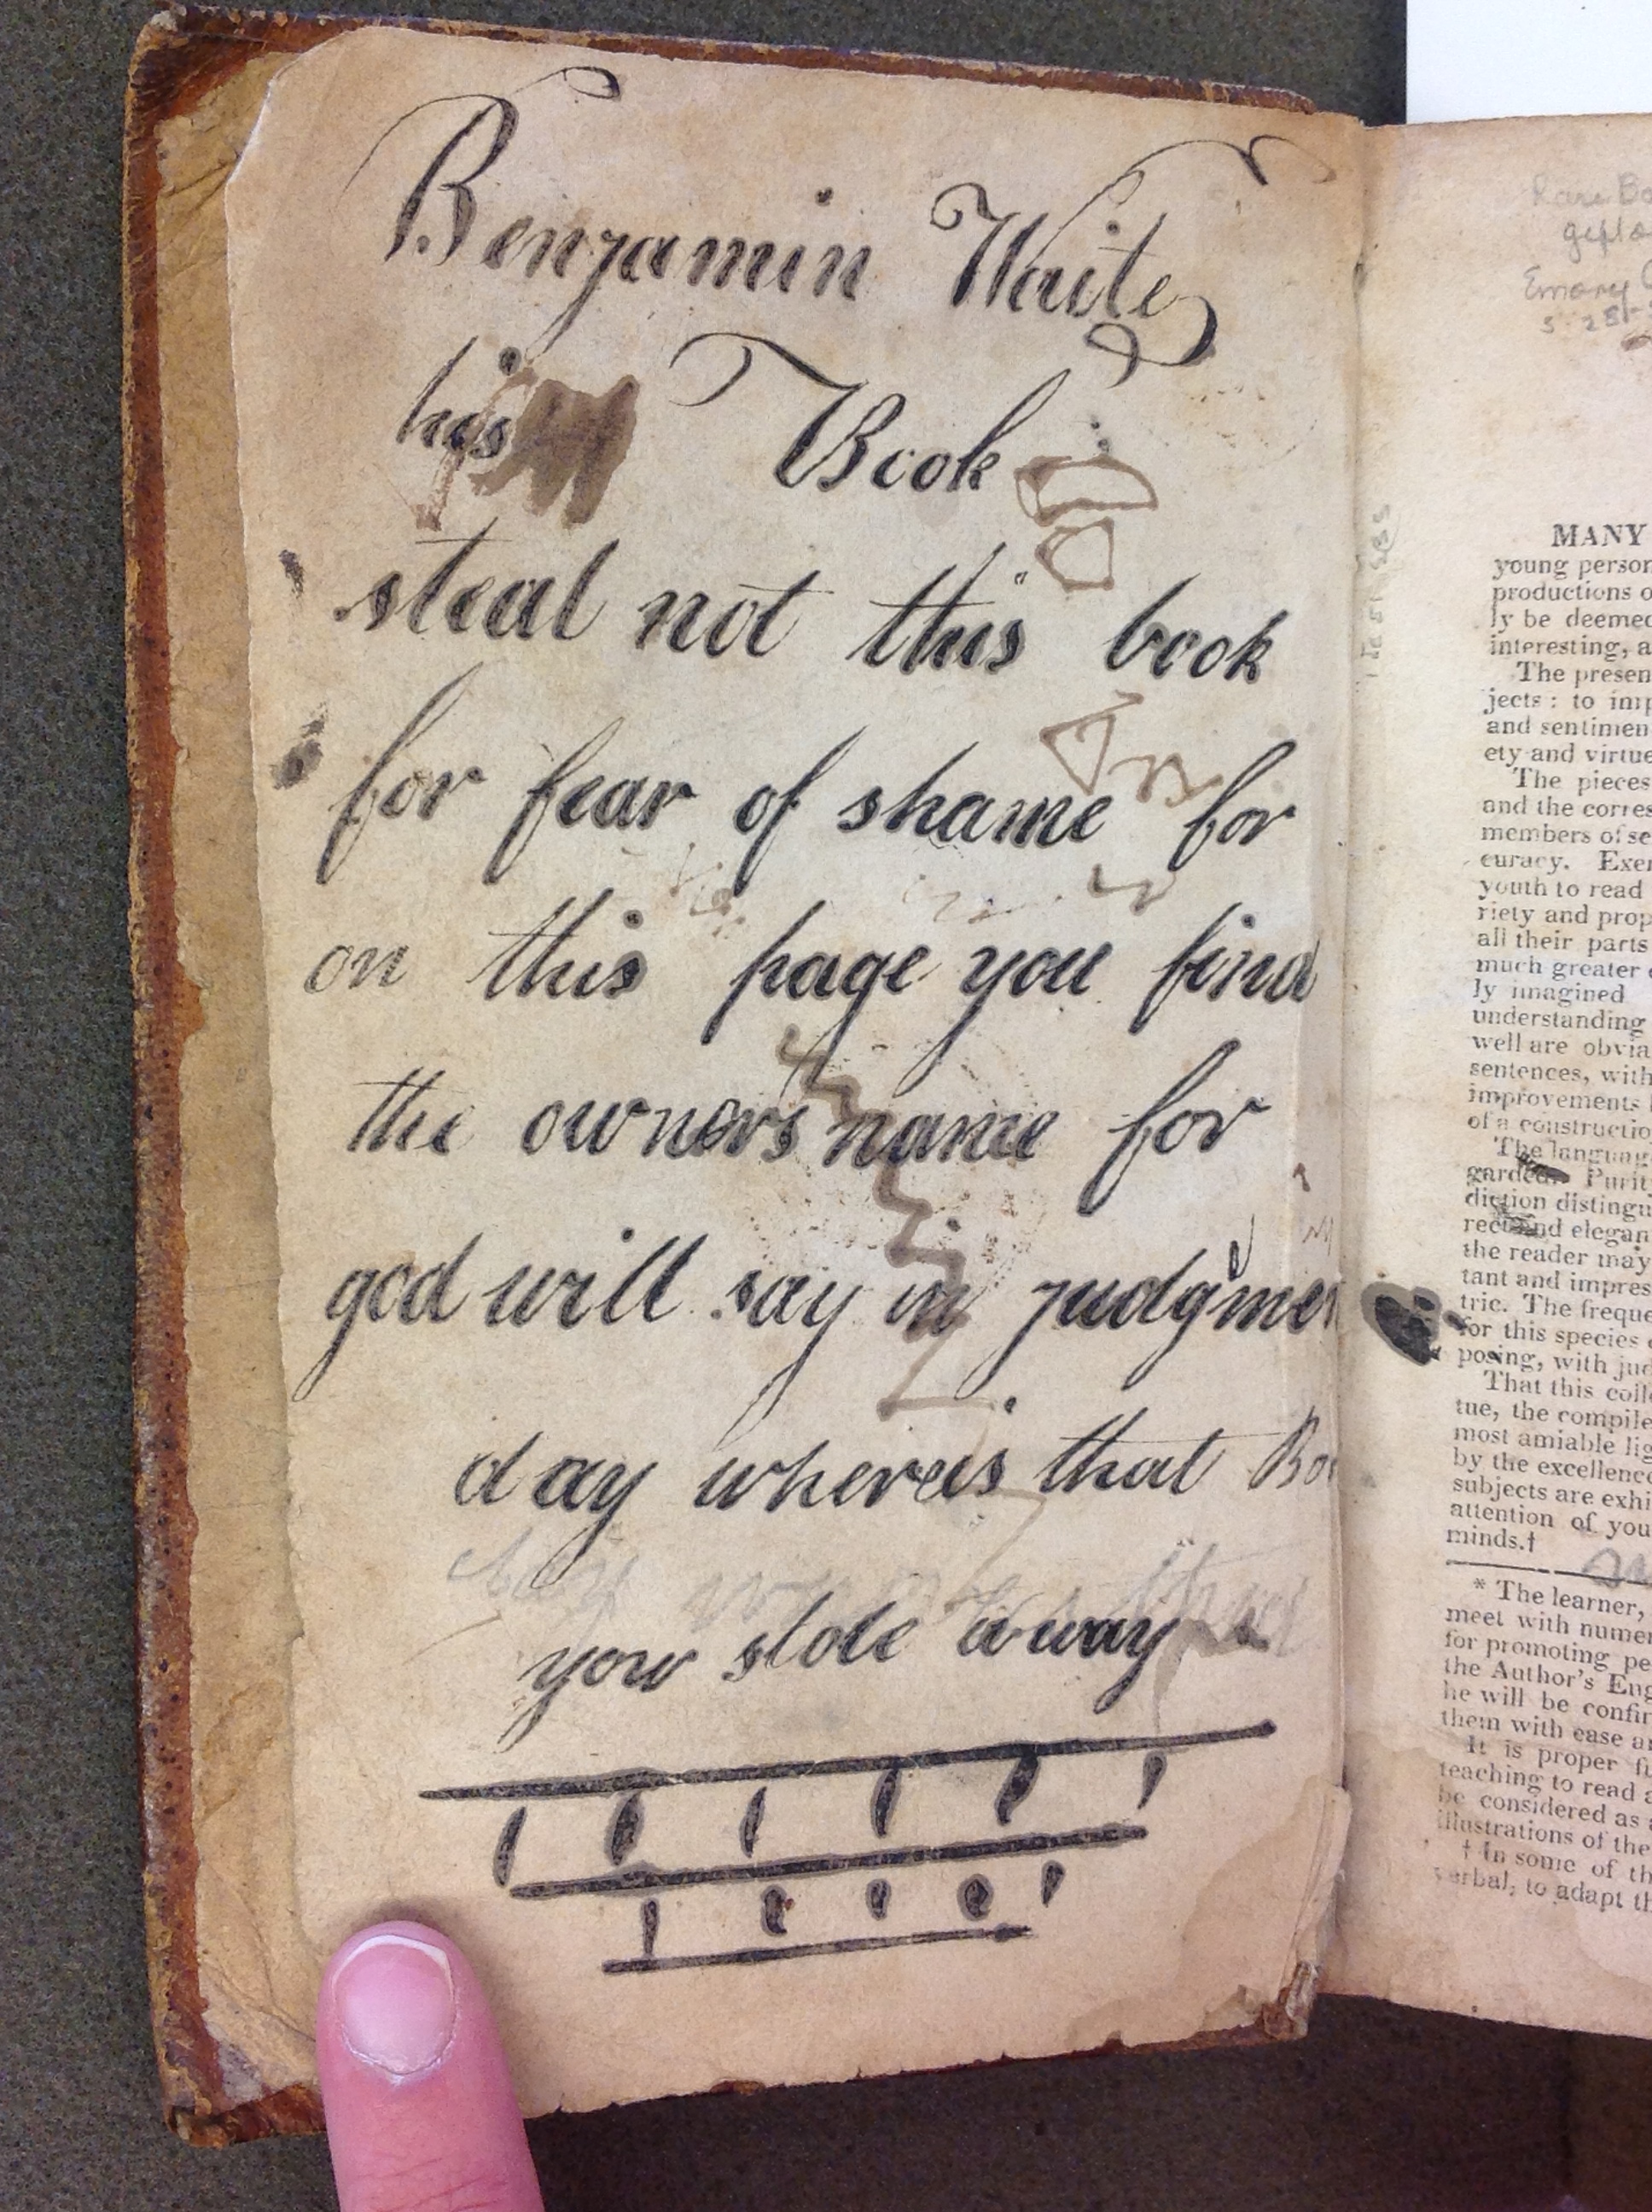 Flyleaf rhyme: "Benjamin Waite his Book. Steal not this book for fear of shame for on this page you find the owner's name. For God will say on Judgment Day where is that book you stole away."